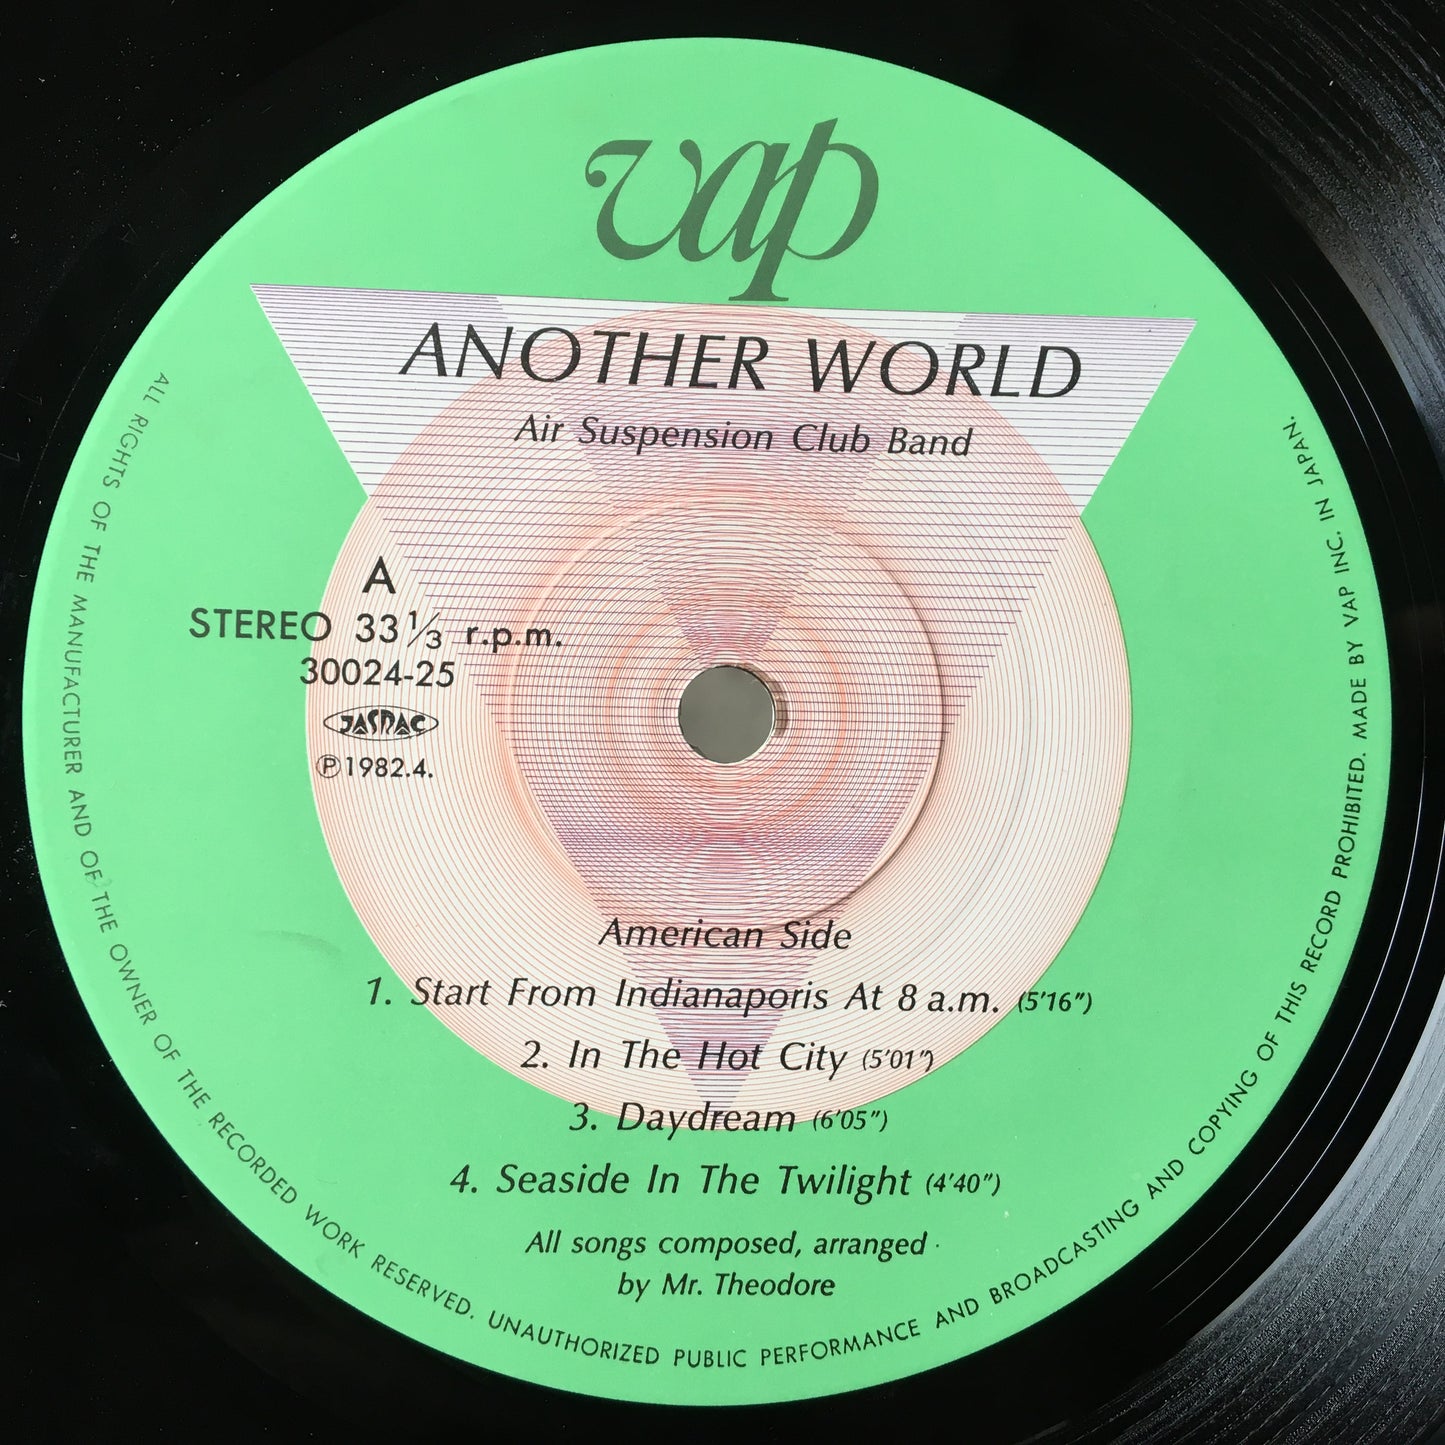 Air Suspension Club Band – Another World